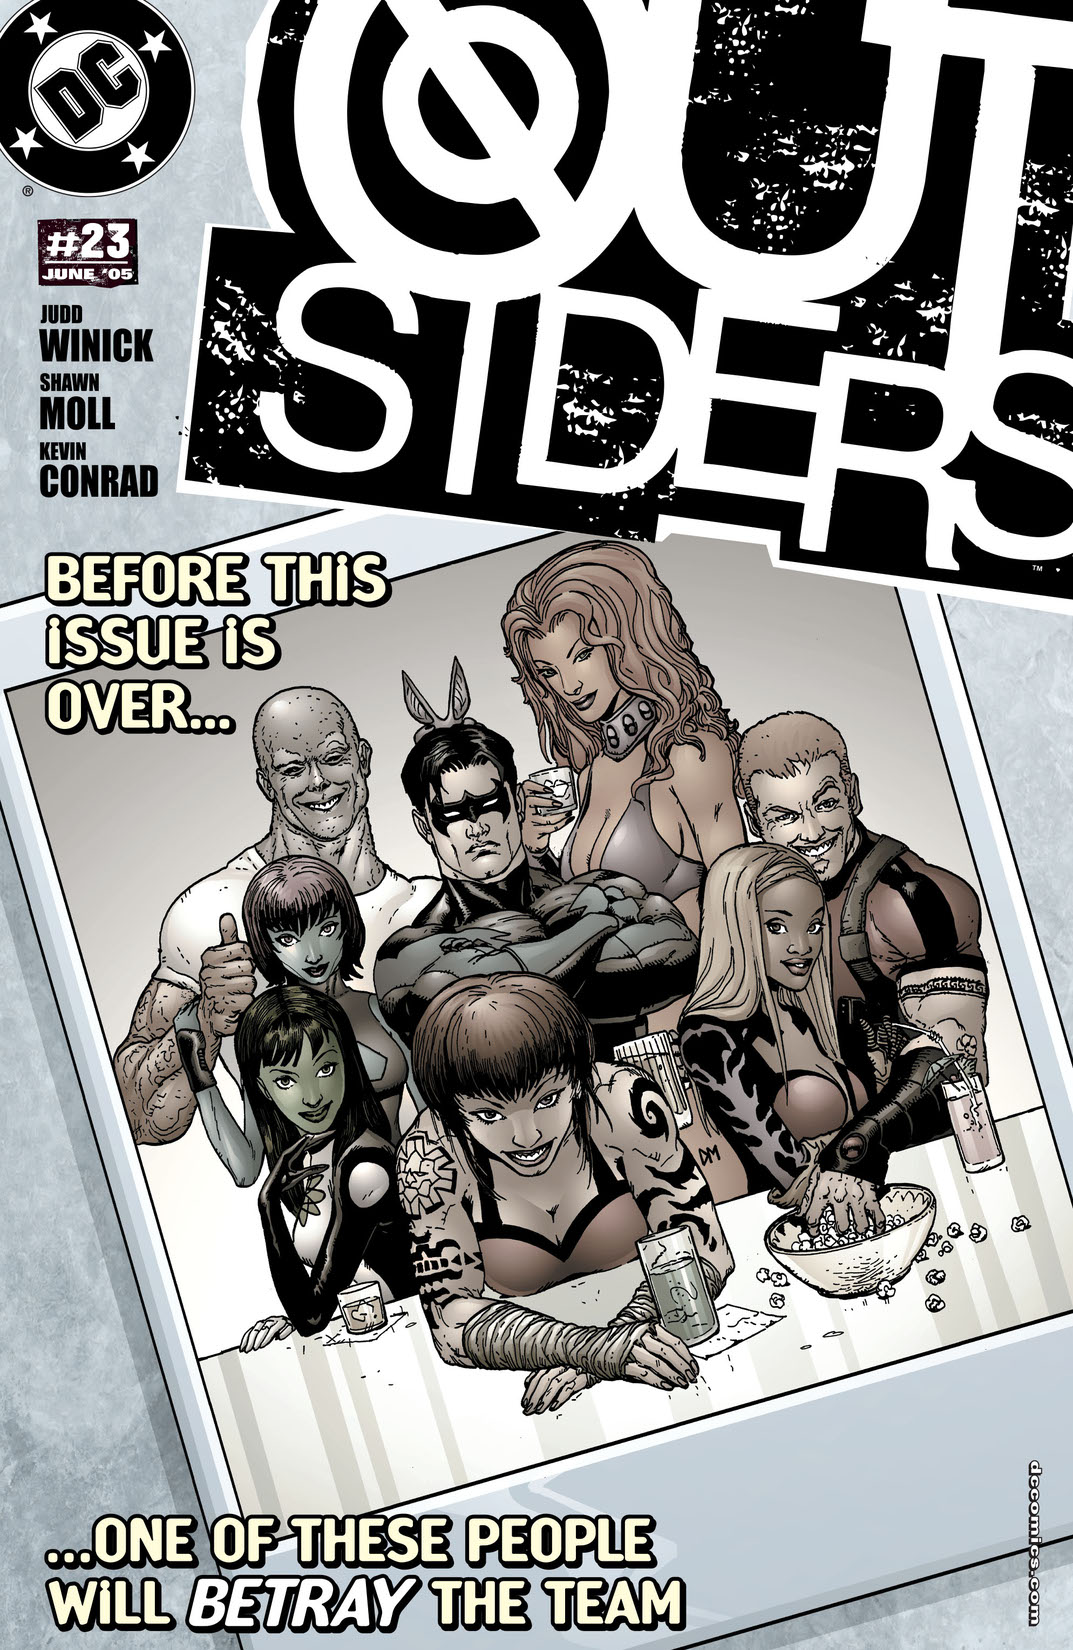 Outsiders (2003-) #23 preview images